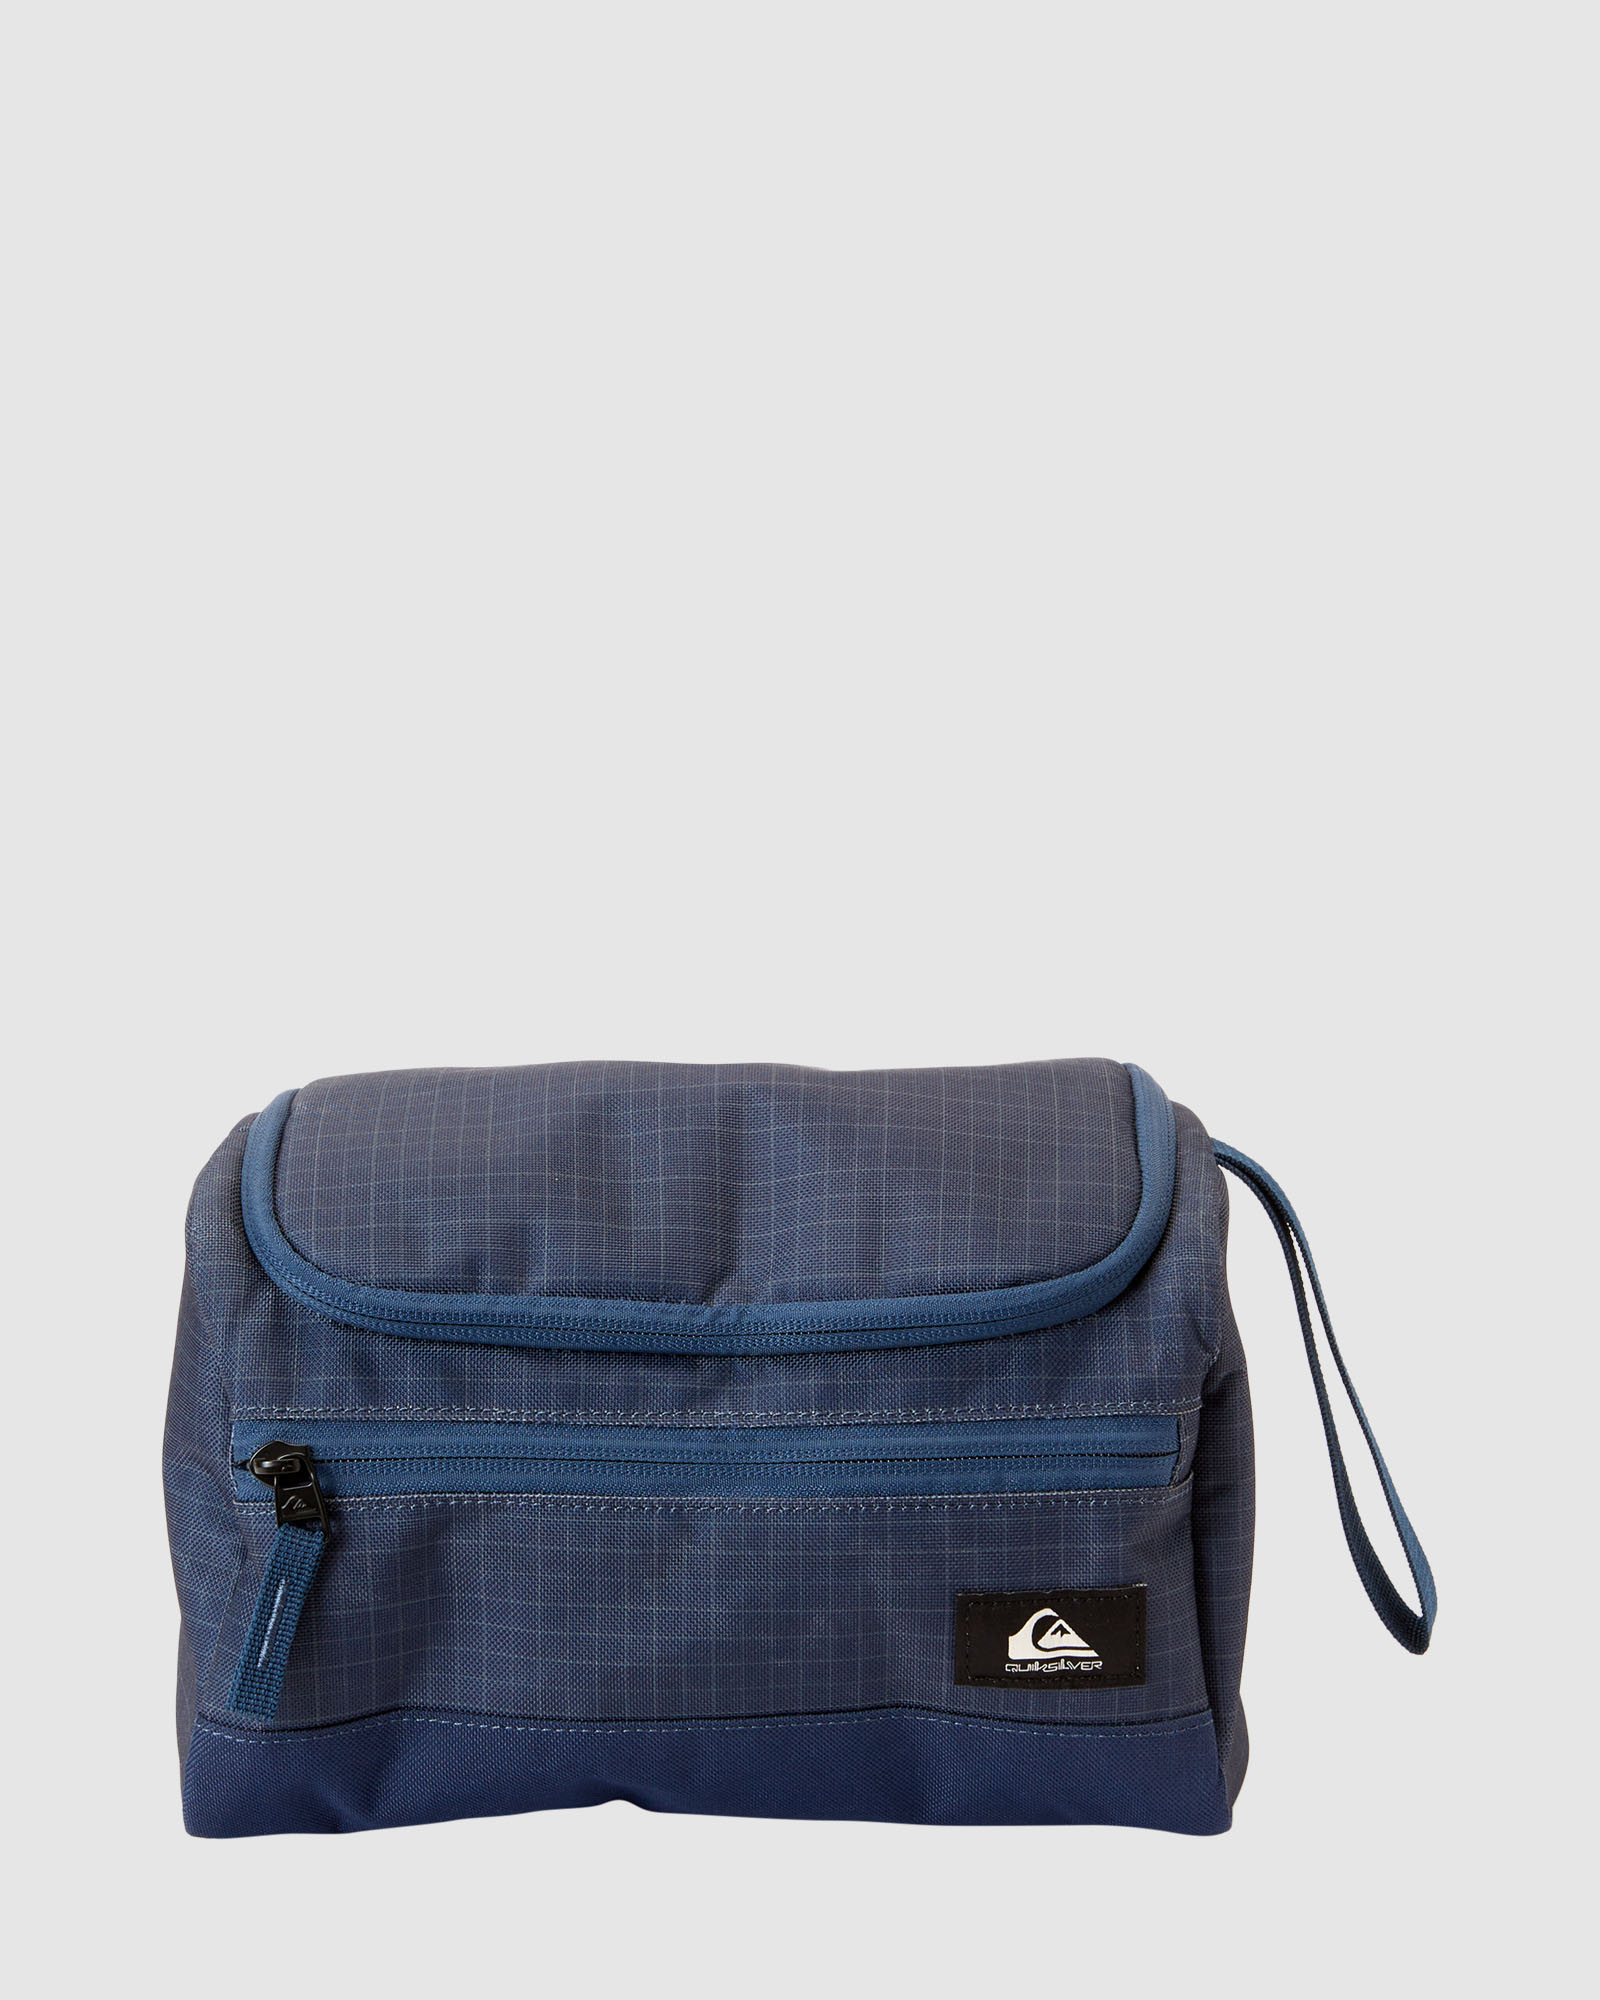 Quiksilver Capsule - Academy Naval SurfStitch 